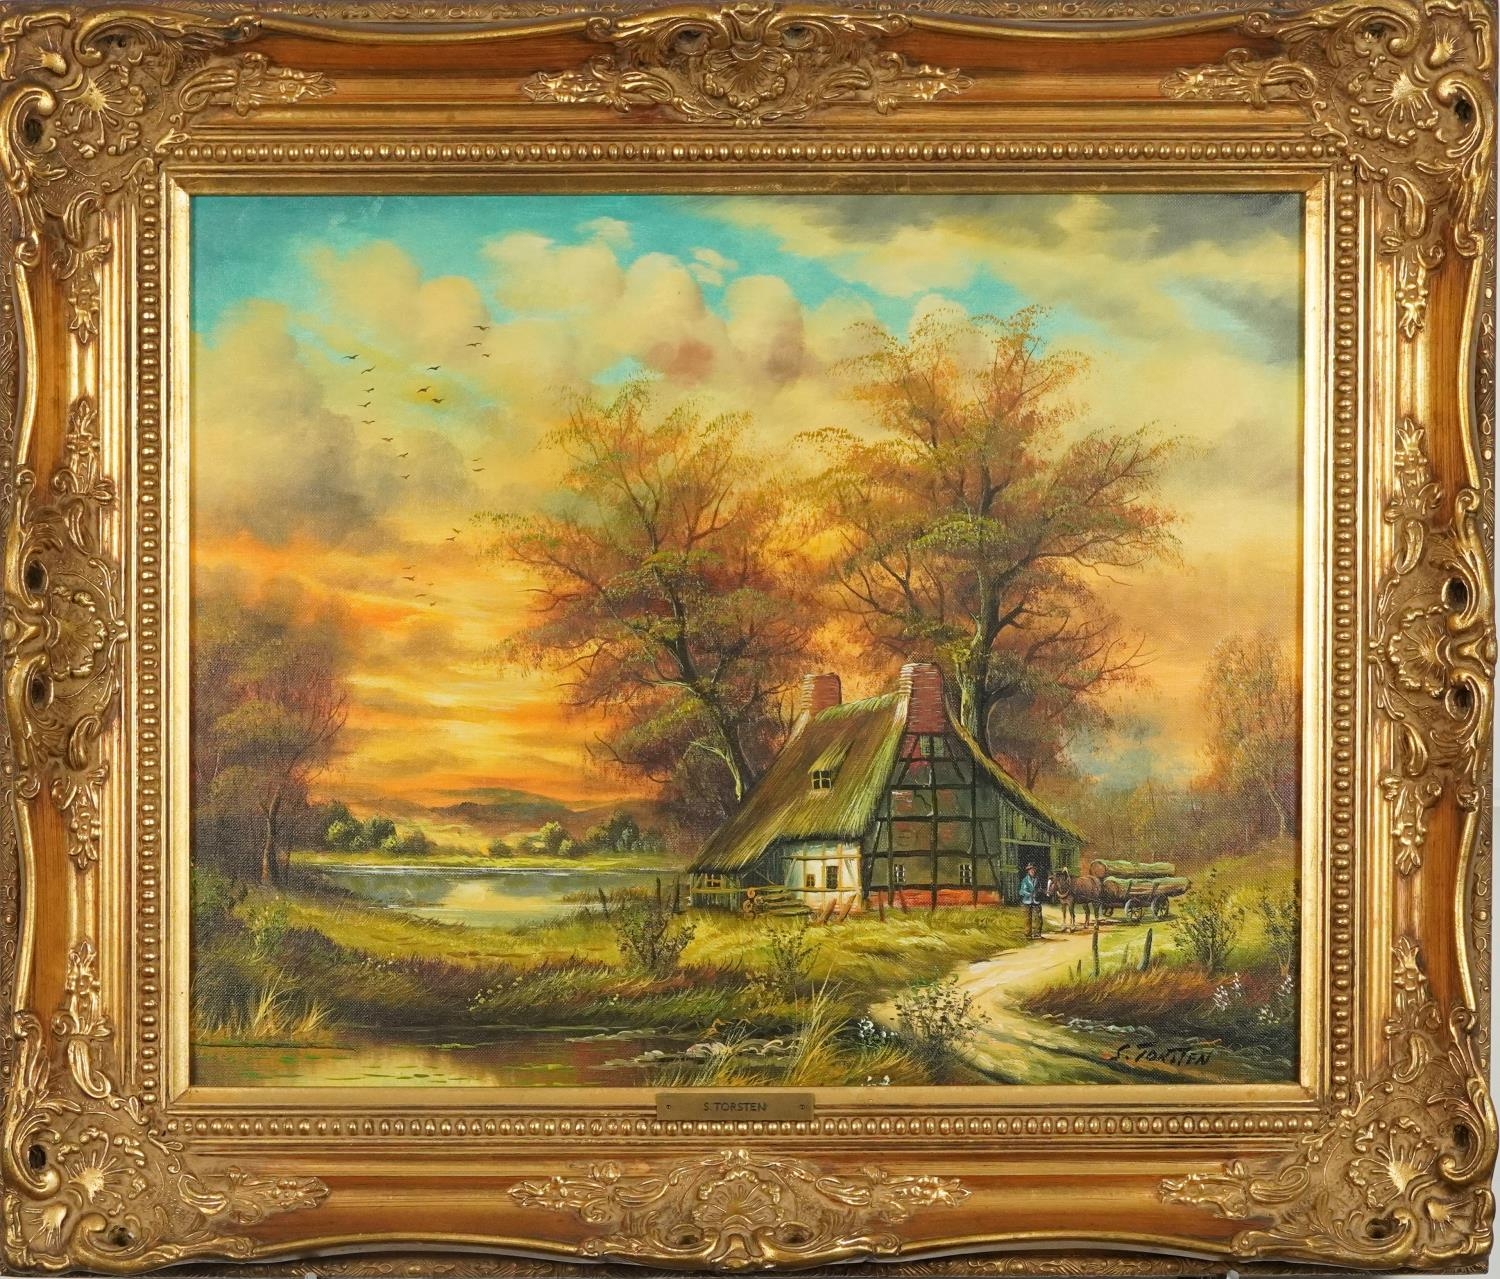 S Torsten - Cottage beside water, 19th century style oil on canvas, mounted and framed, 49cm x 39. - Image 2 of 4